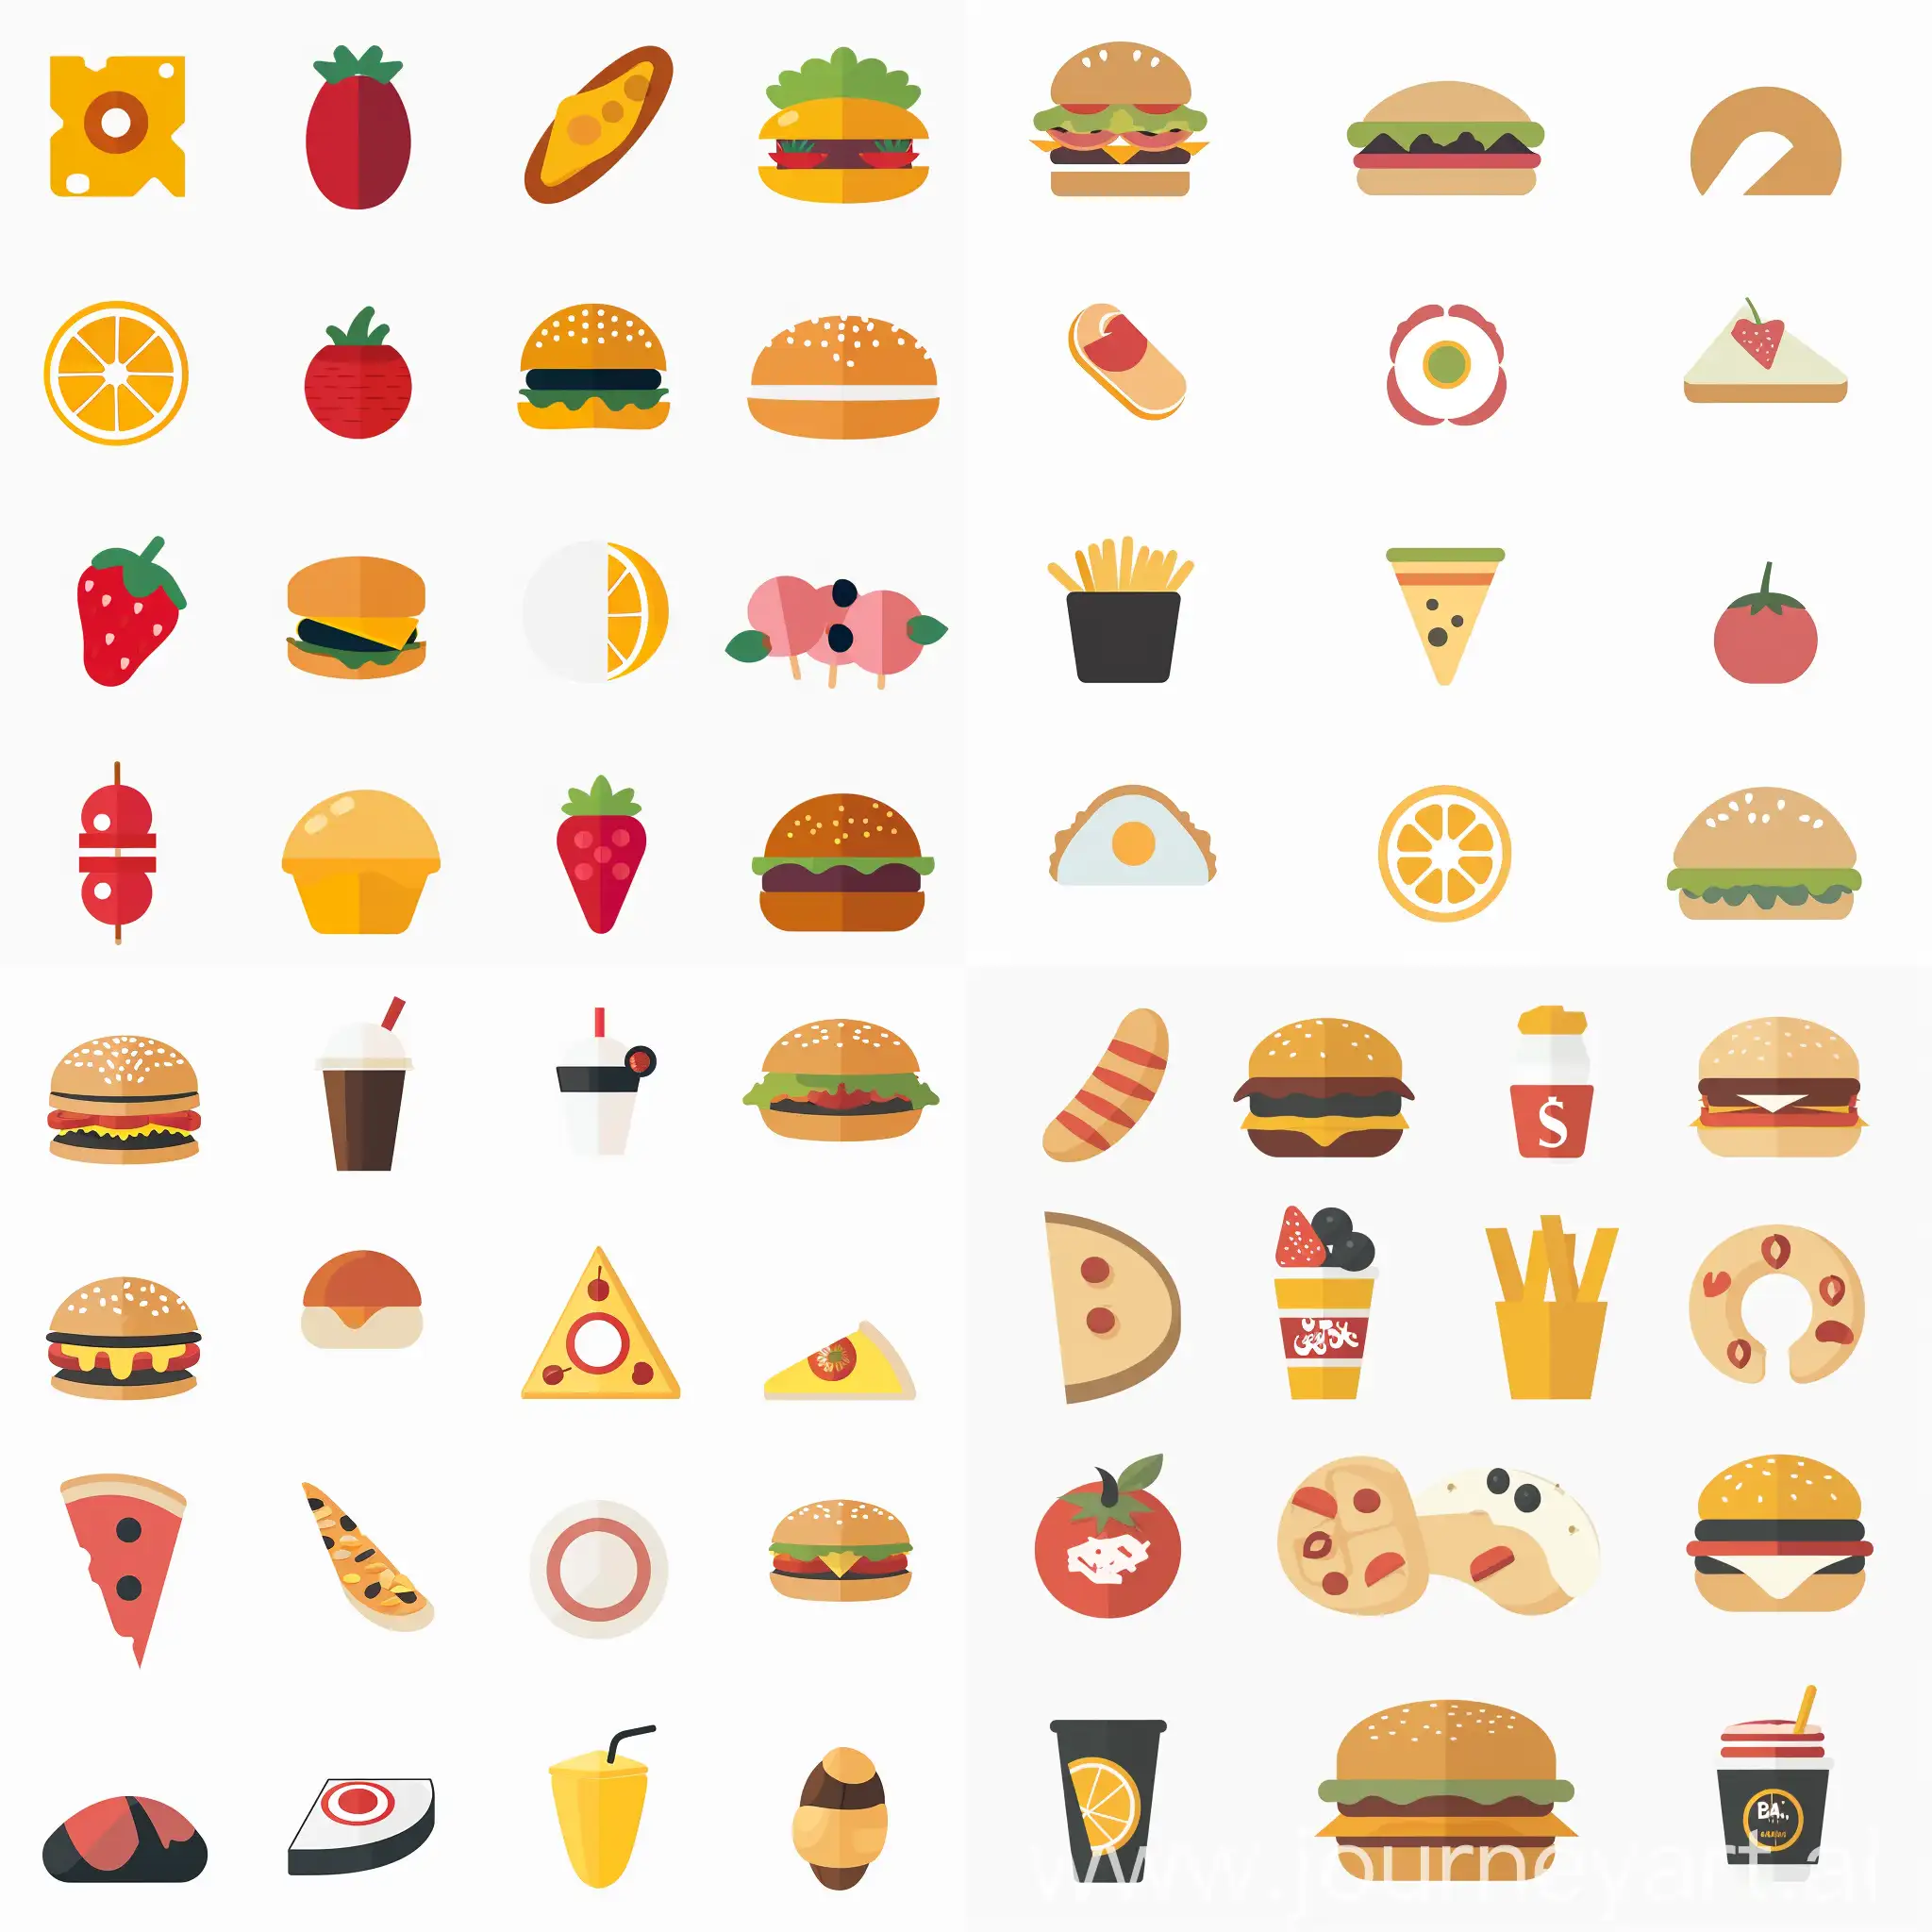 Various-Food-Vector-Icons-on-White-Background-High-Quality-Flat-Style